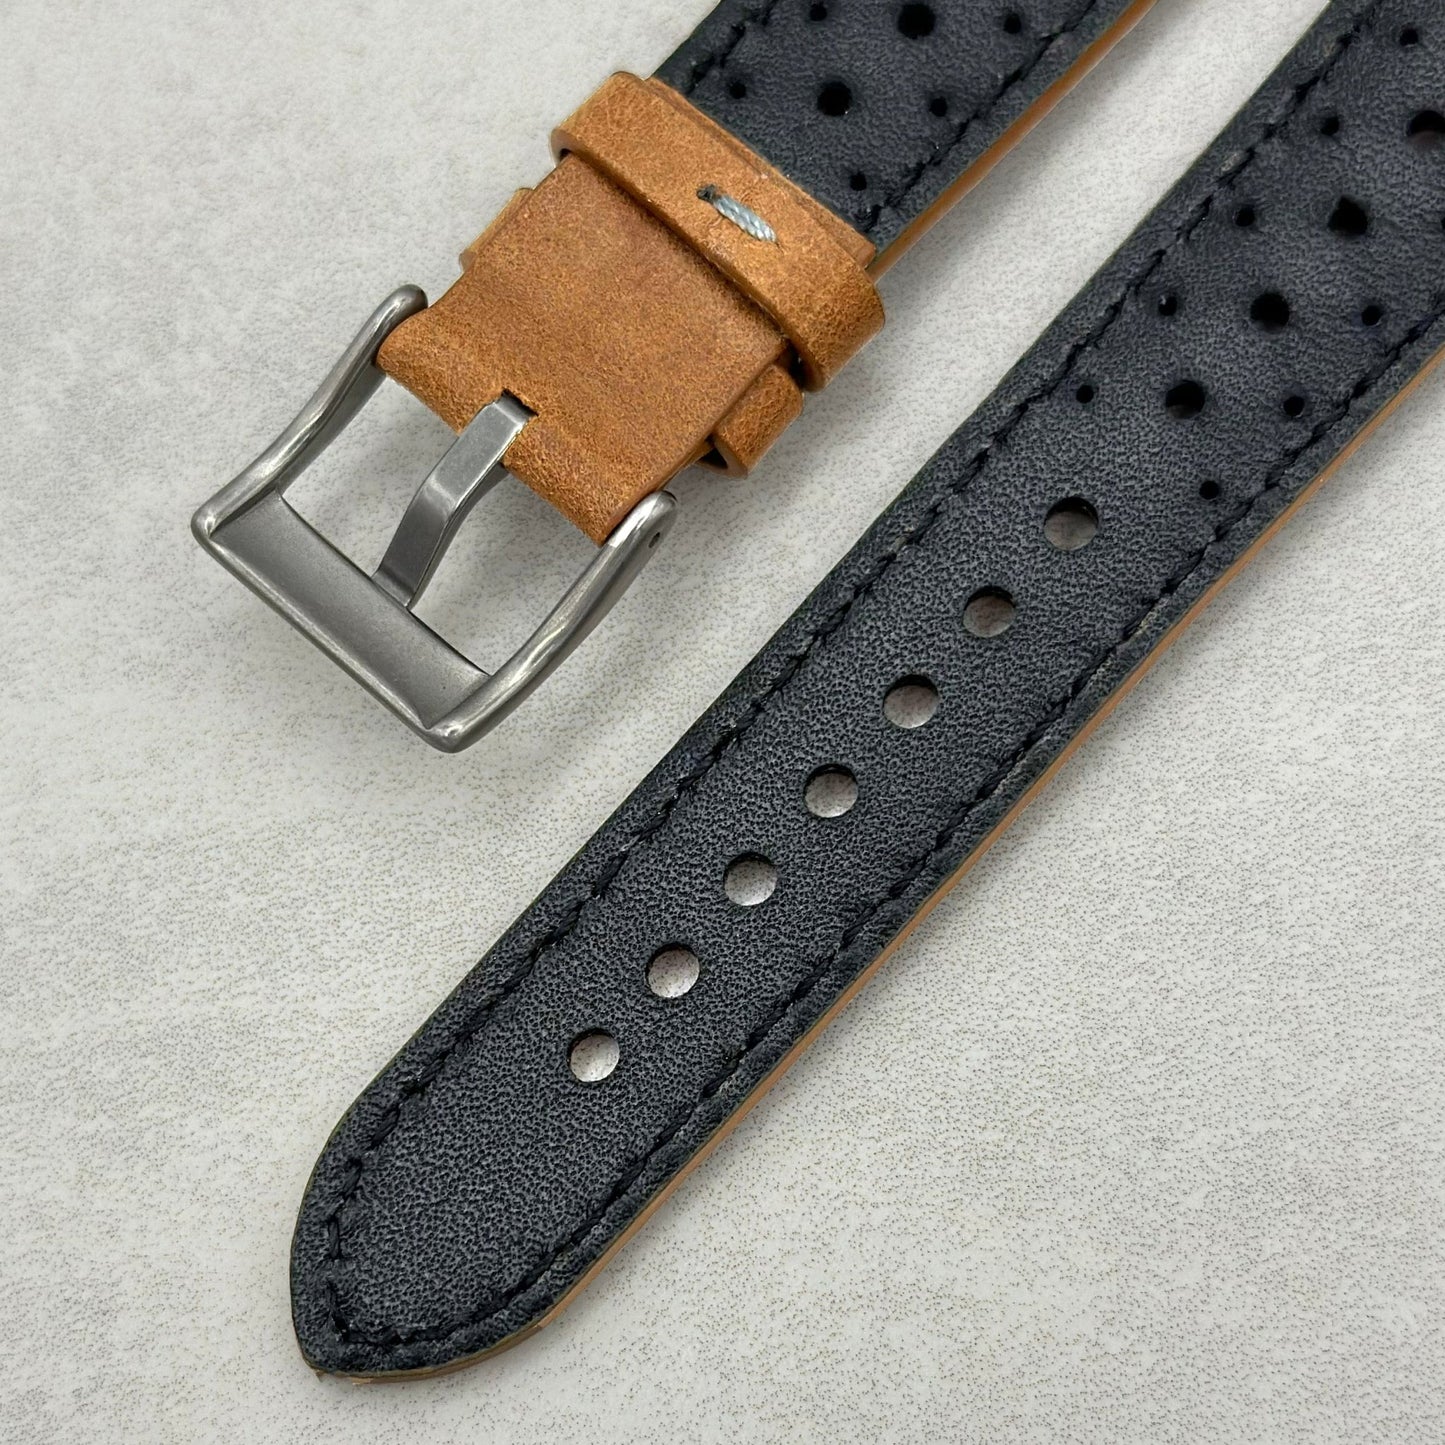 The Monte Carlo: Vintage Tan Perforated Leather Google Pixel Watch Strap